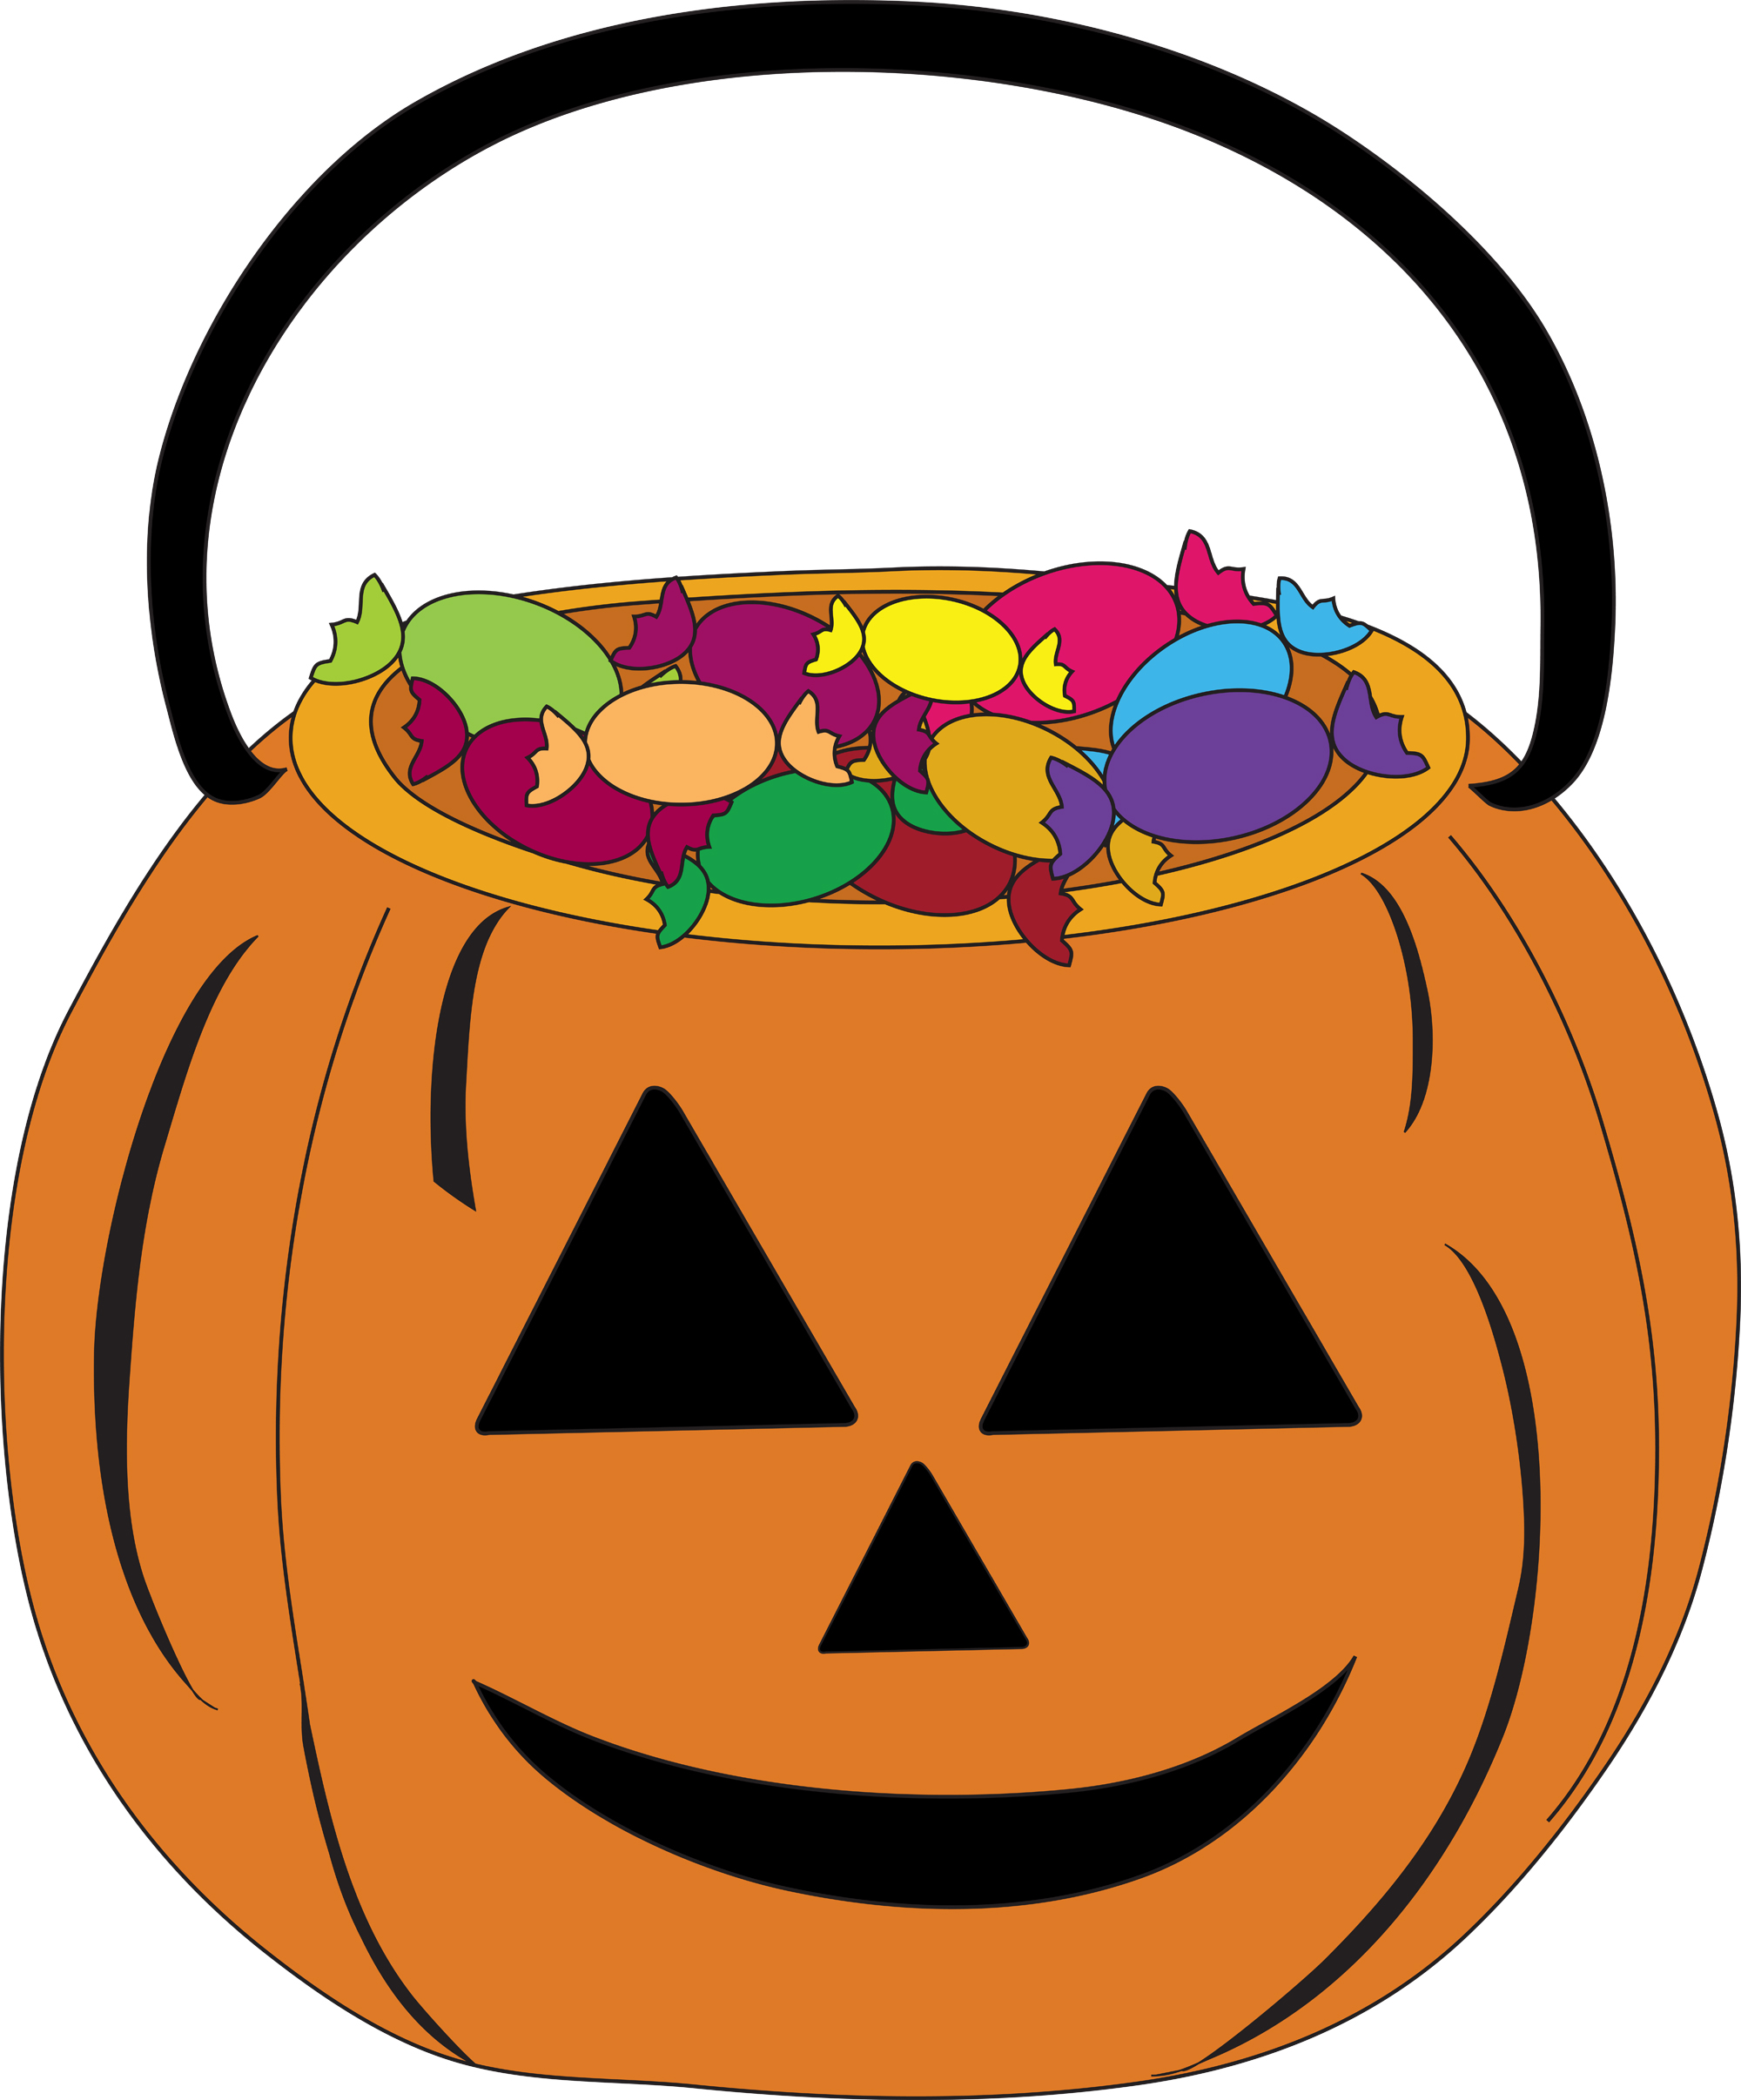 Halloween Candy Images Hd Image Clipart